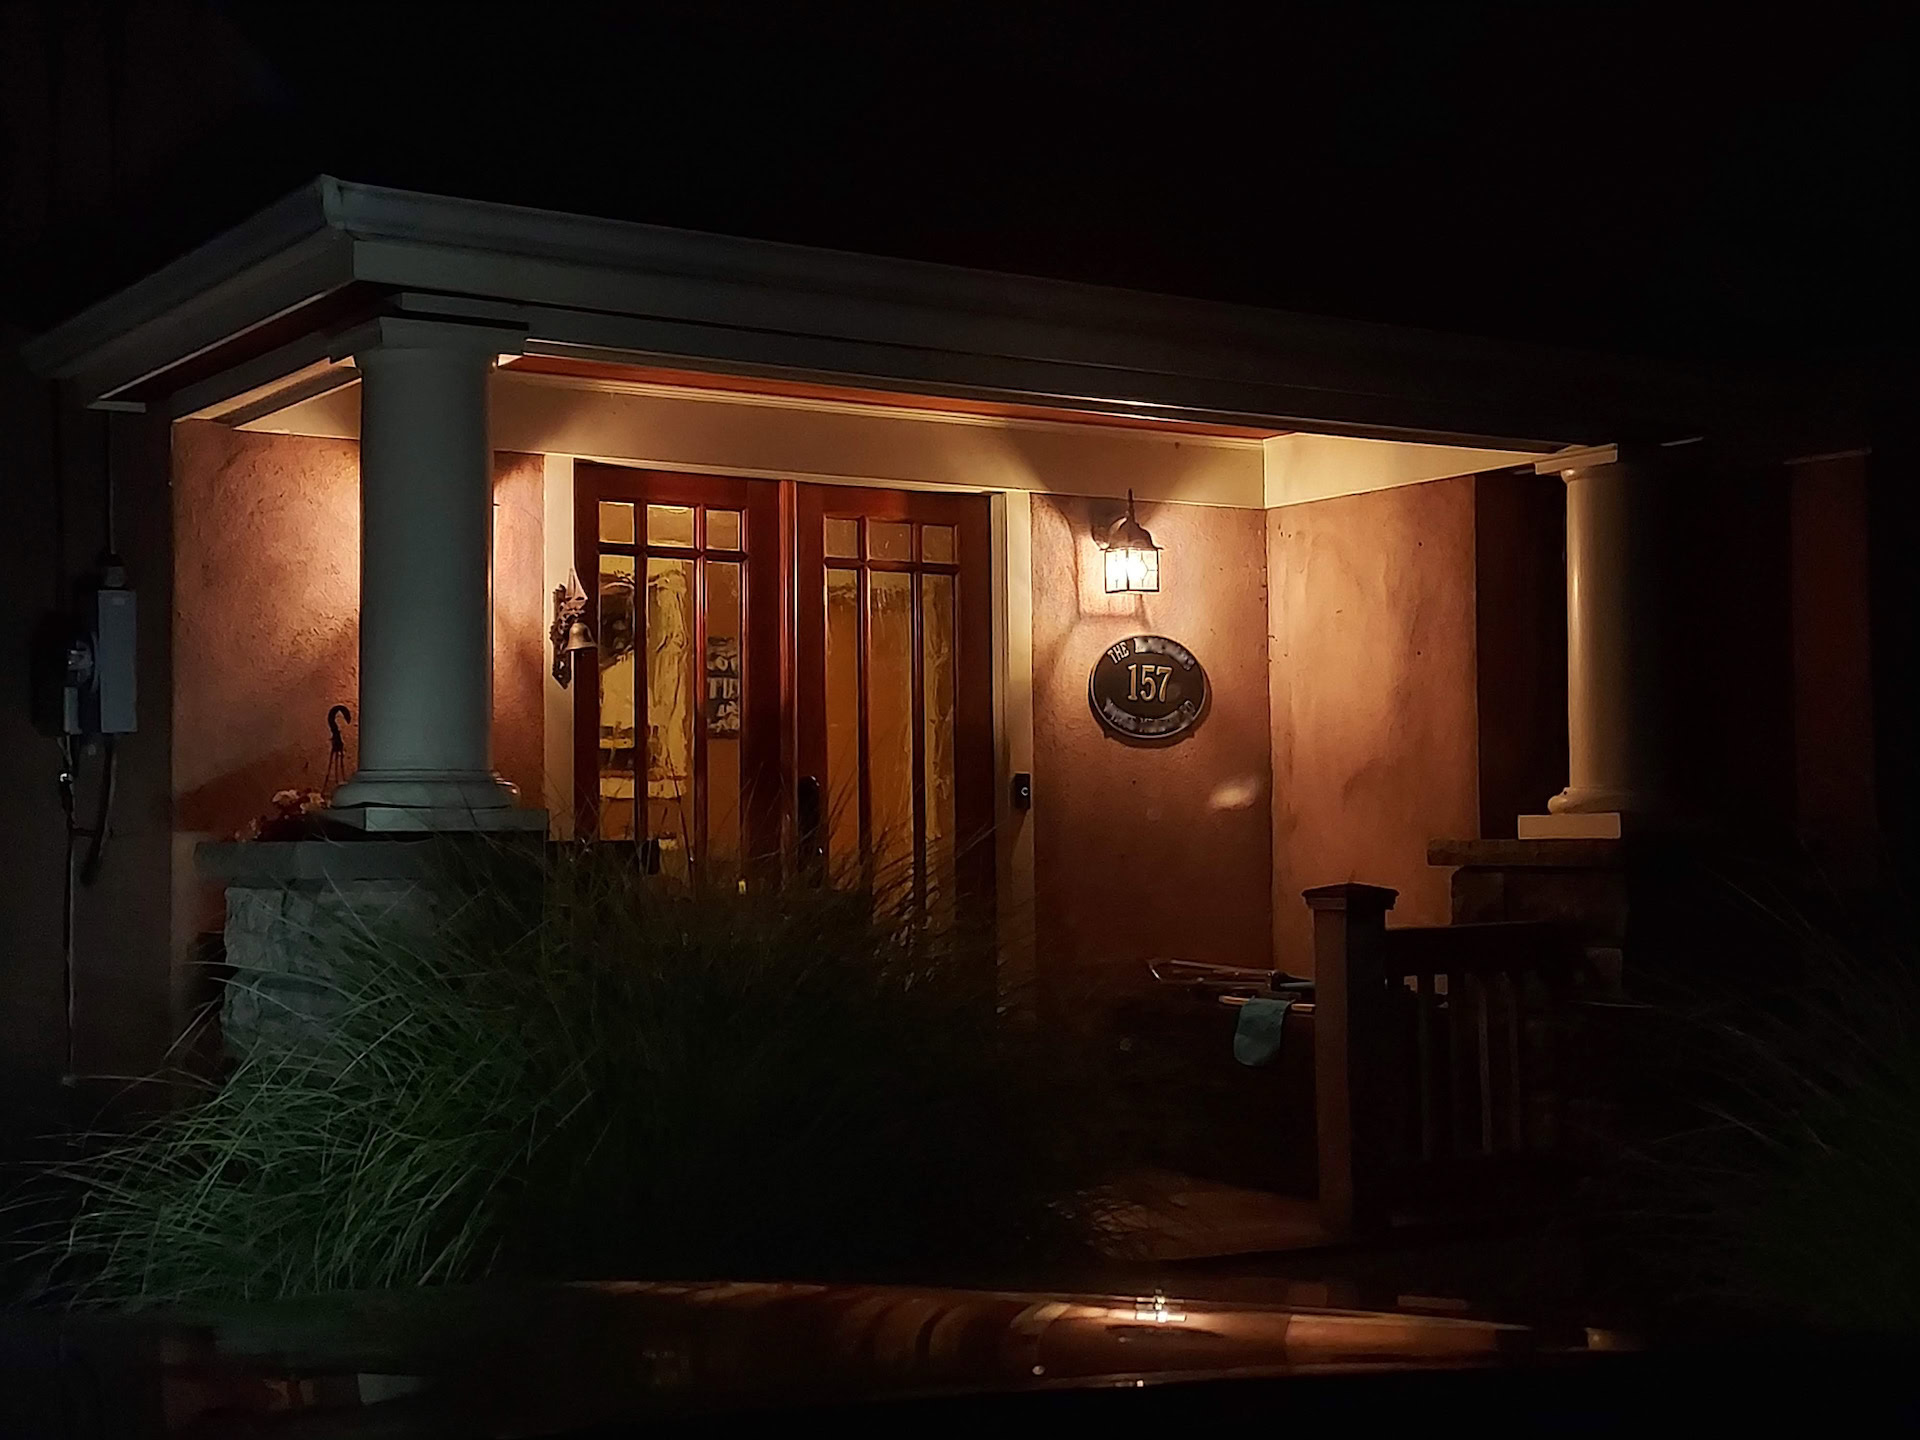 Samsung Galaxy A42 photo sample low light showing the front of a house